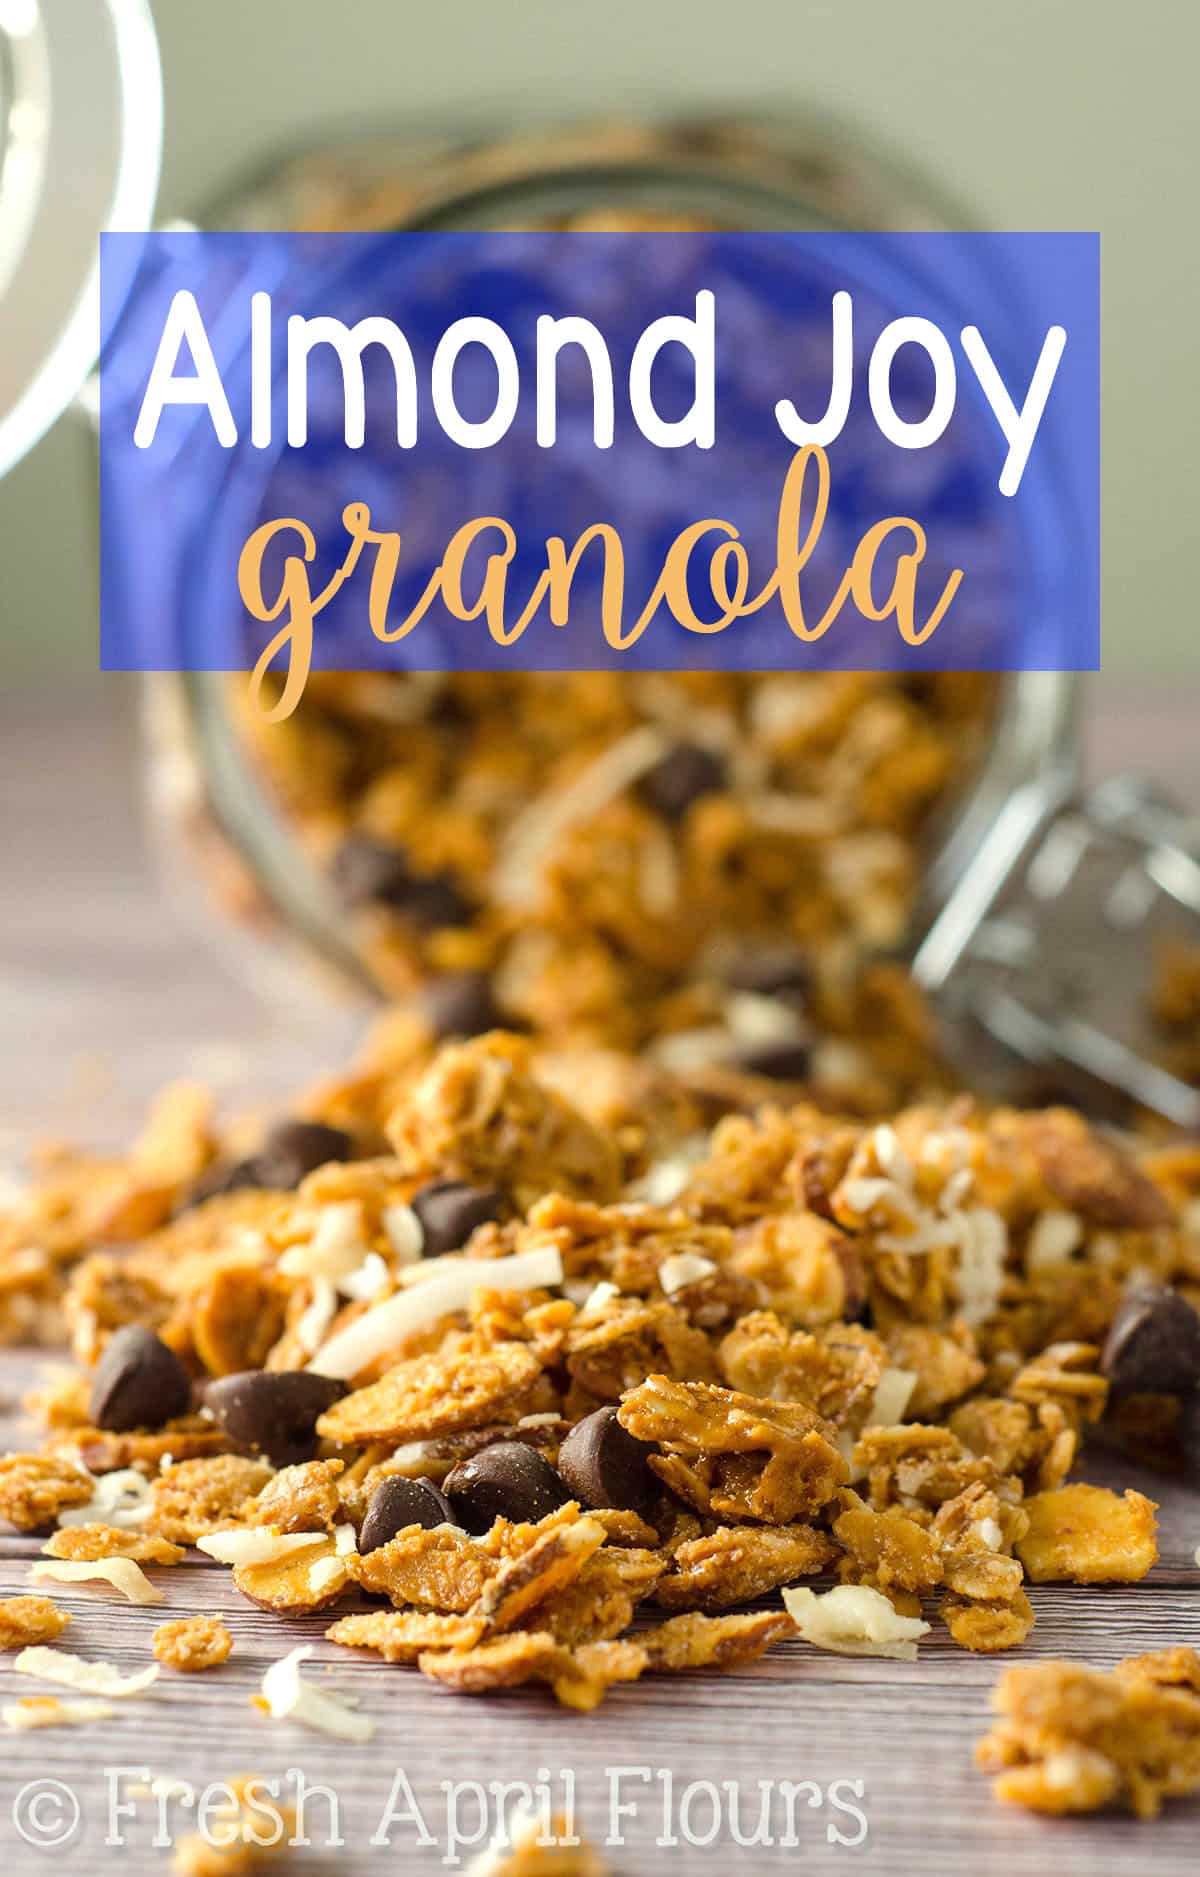 Crunchy and wholesome homemade granola full of almonds, coconut, and chocolate. via @frshaprilflours